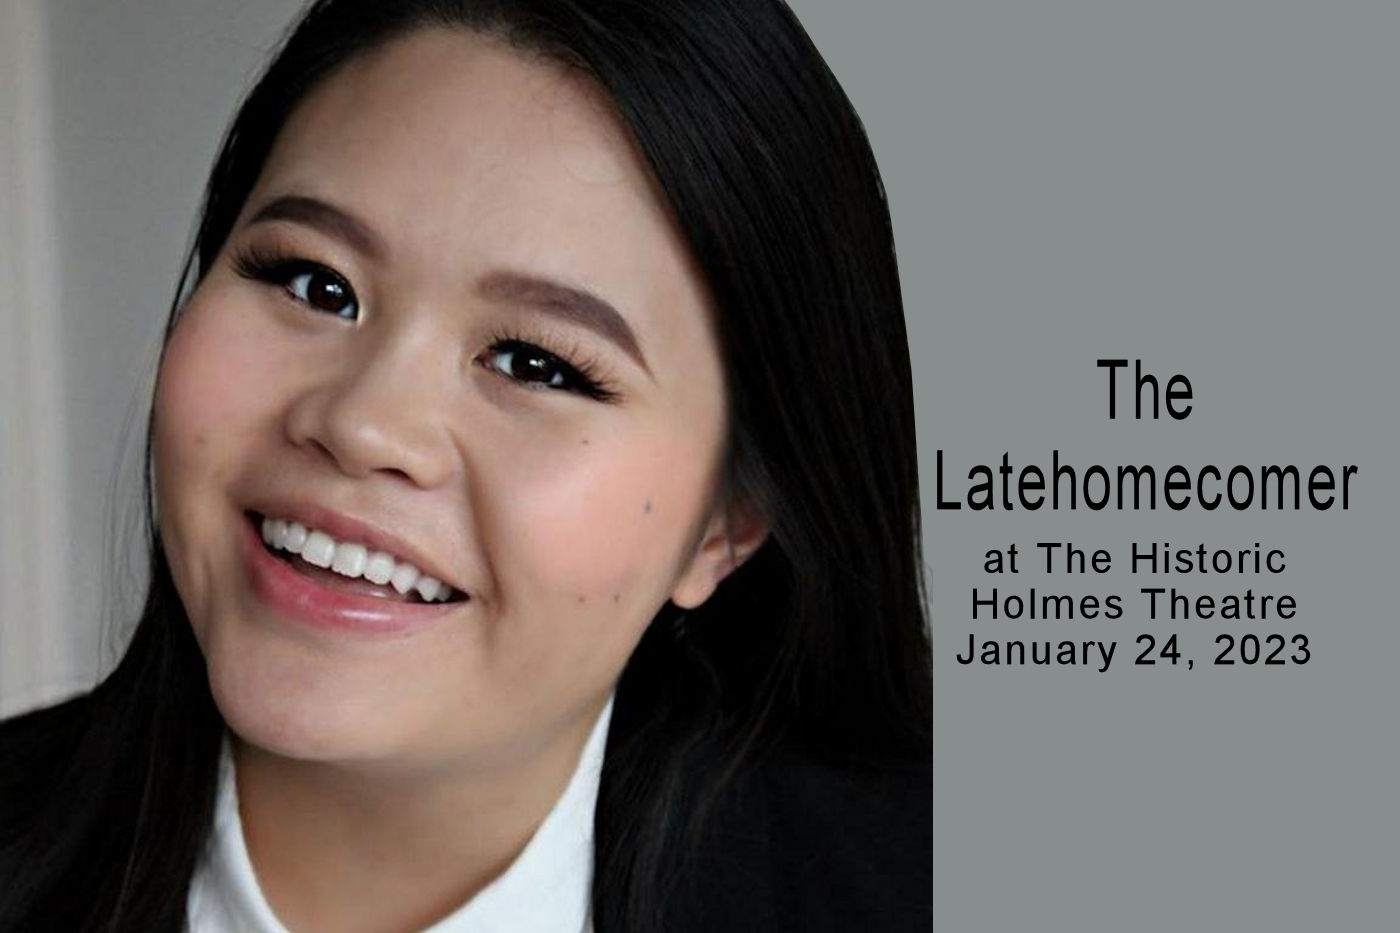 The Latehomecomer at The Historic Holmes Theatre - Detroit Lakes Event Calendar